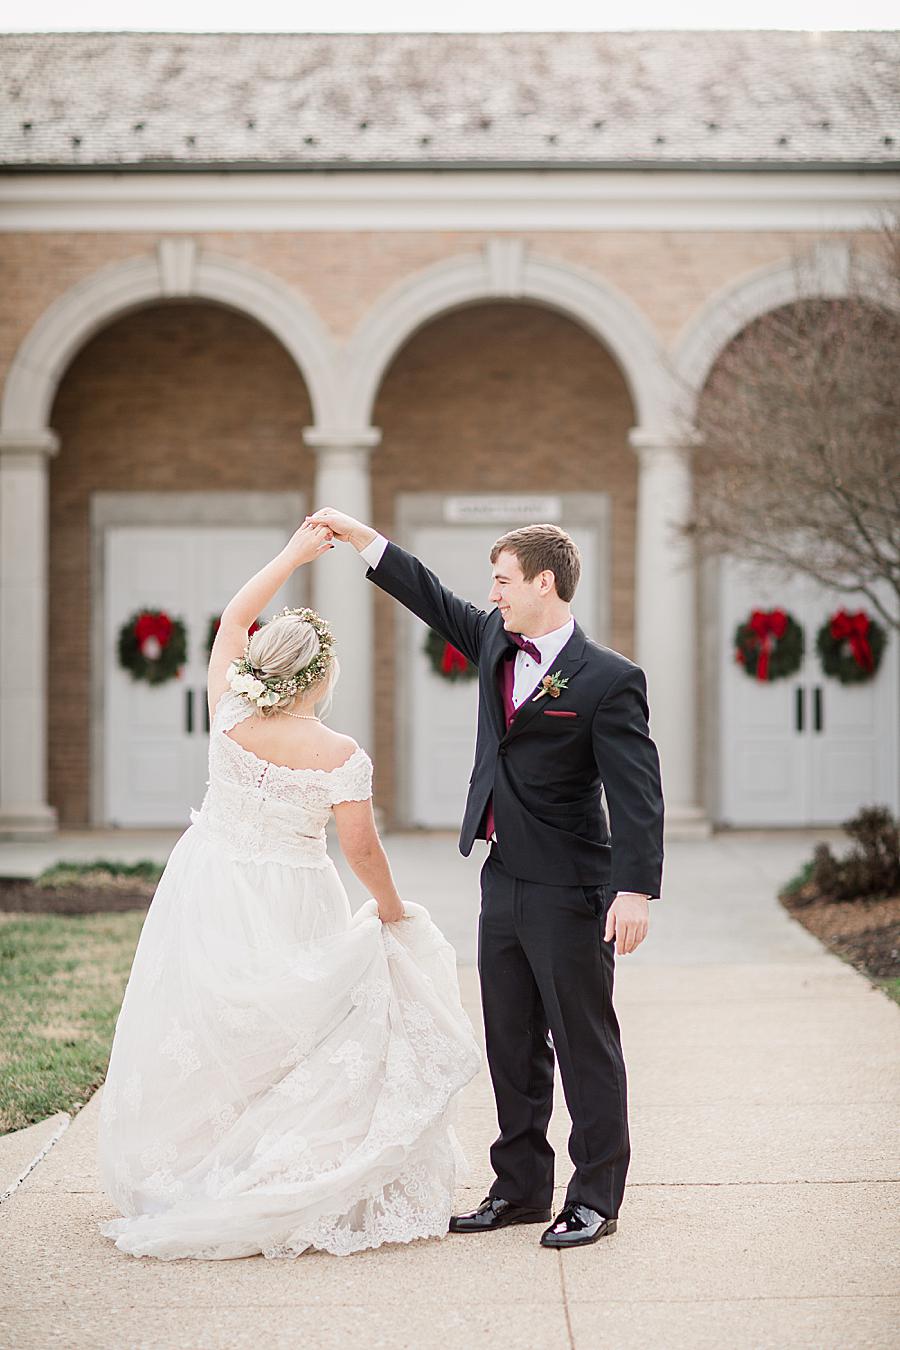 Twirling at this The Foundry Wedding by Knoxville Wedding Photographer, Amanda May Photos.